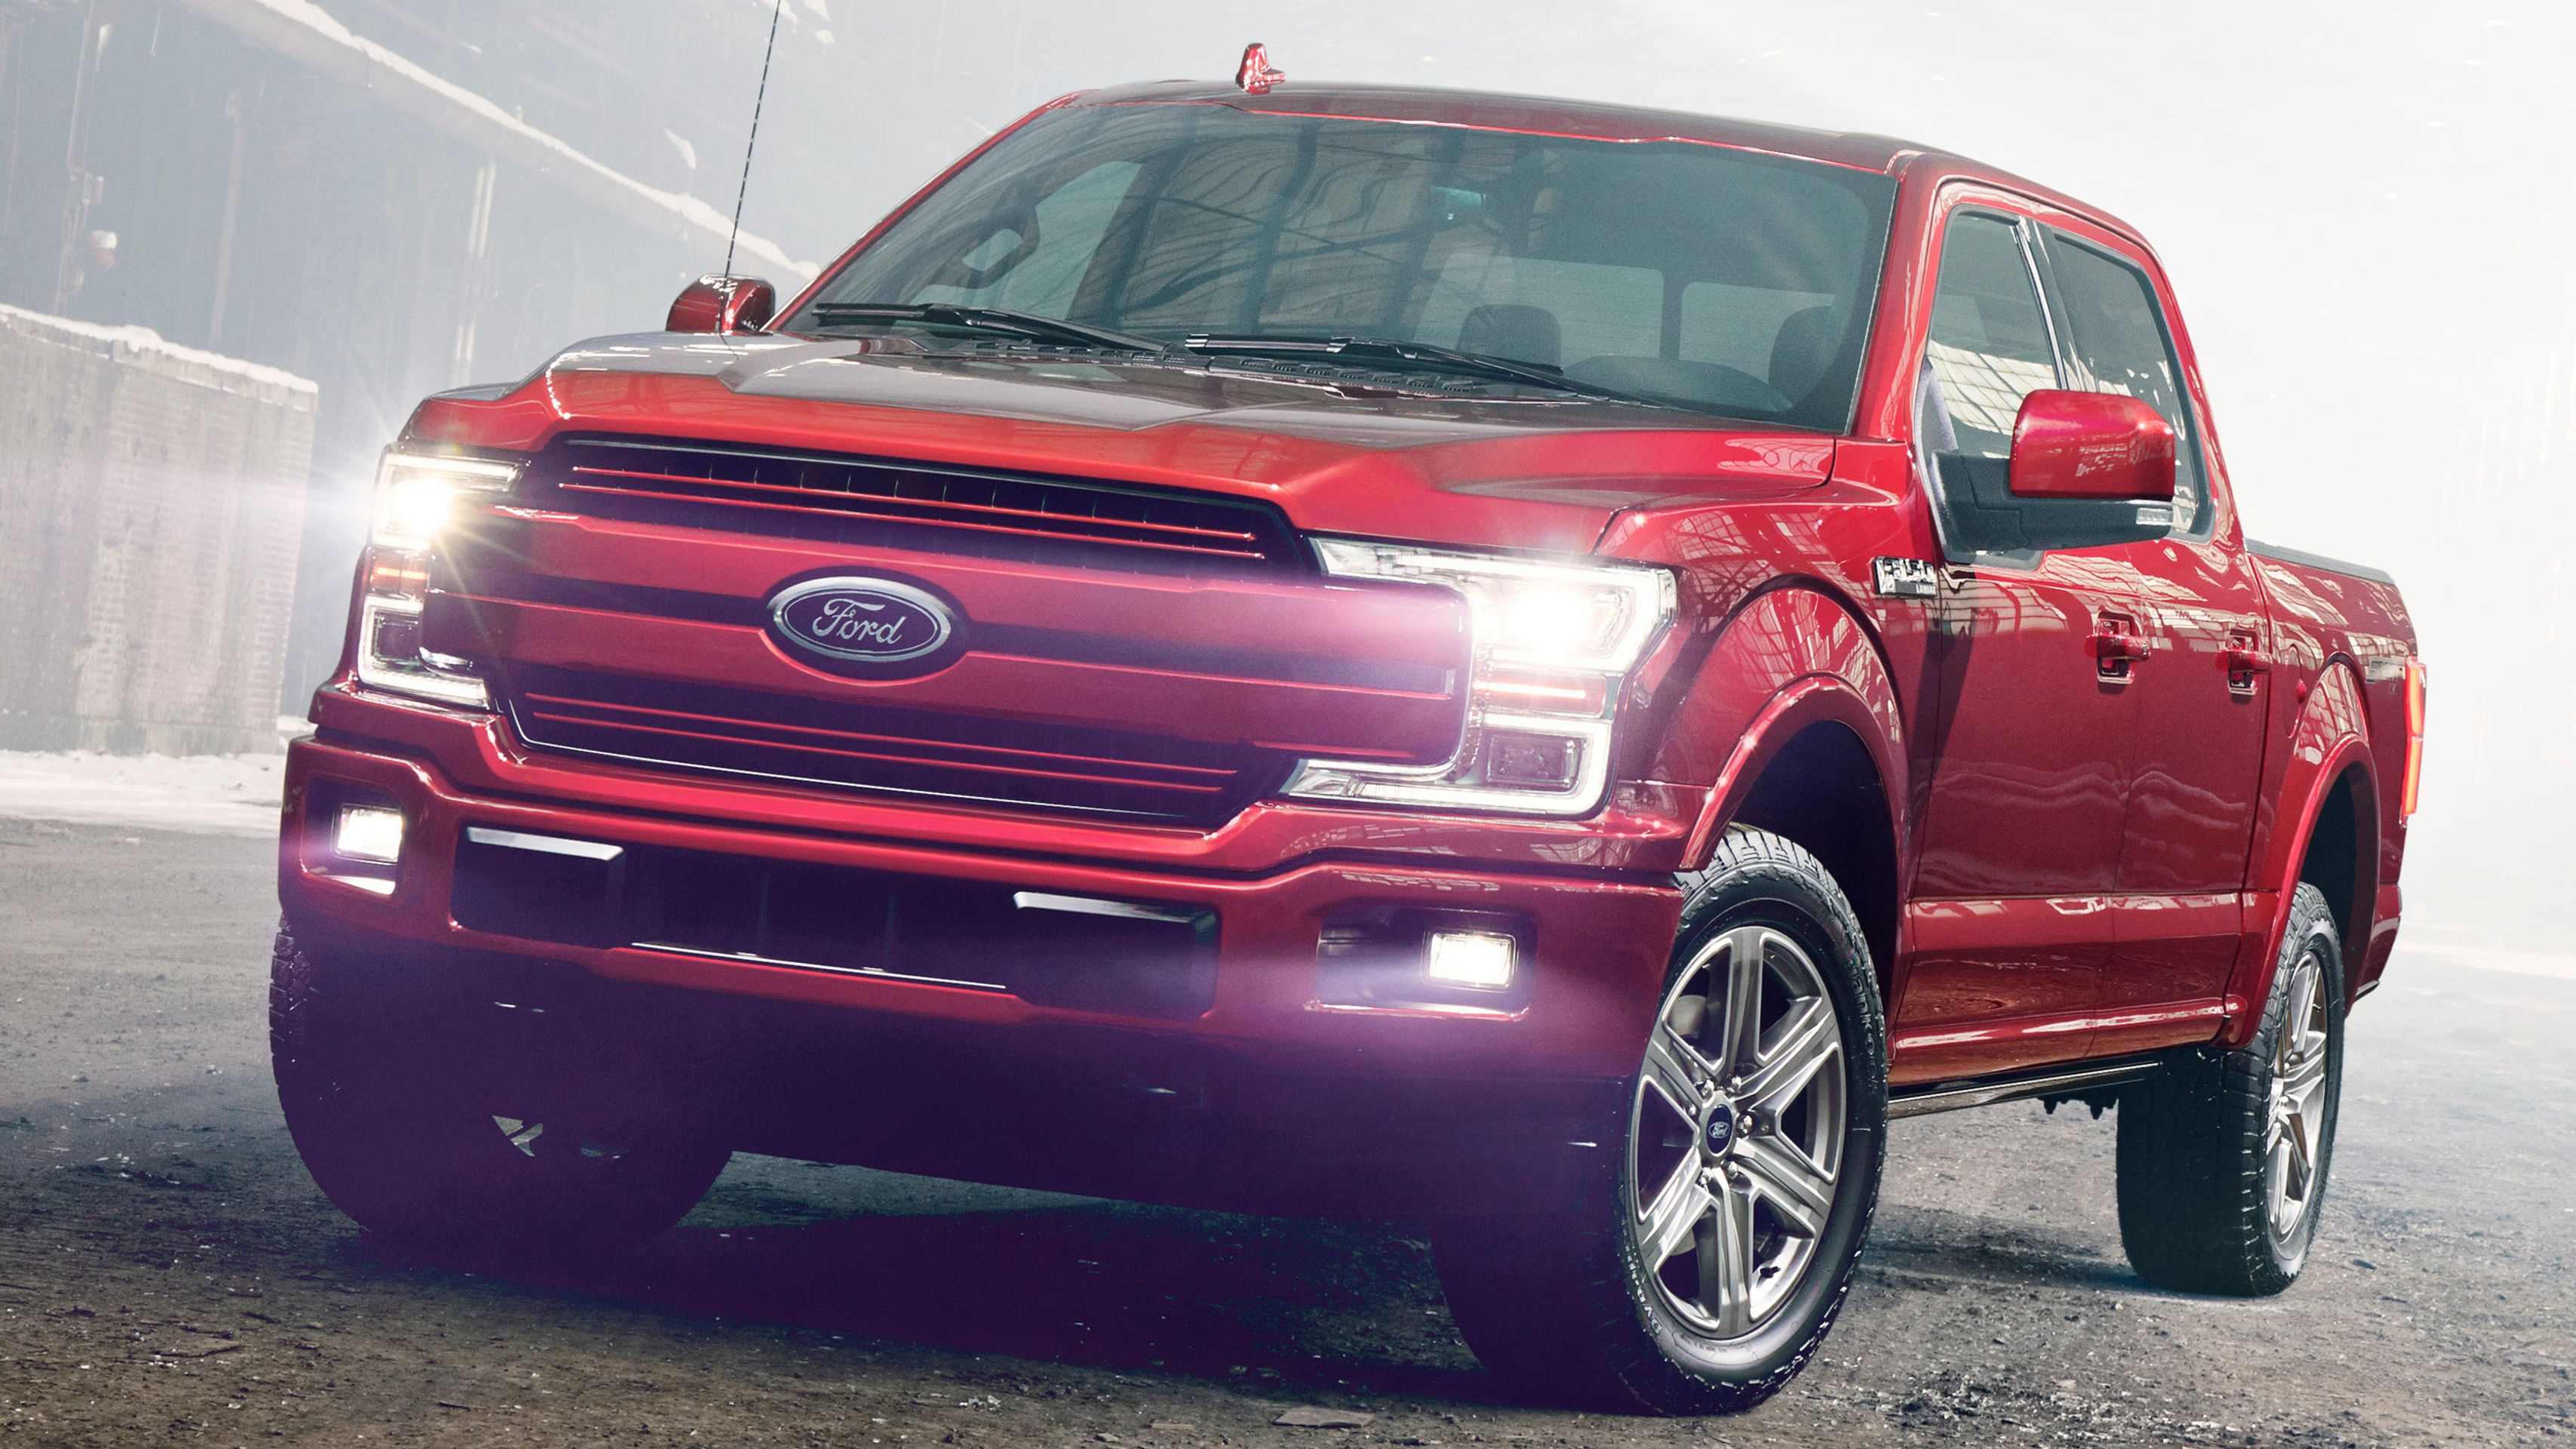 F-150 - 18 - GALERIE: Ford F-150 (7/10)